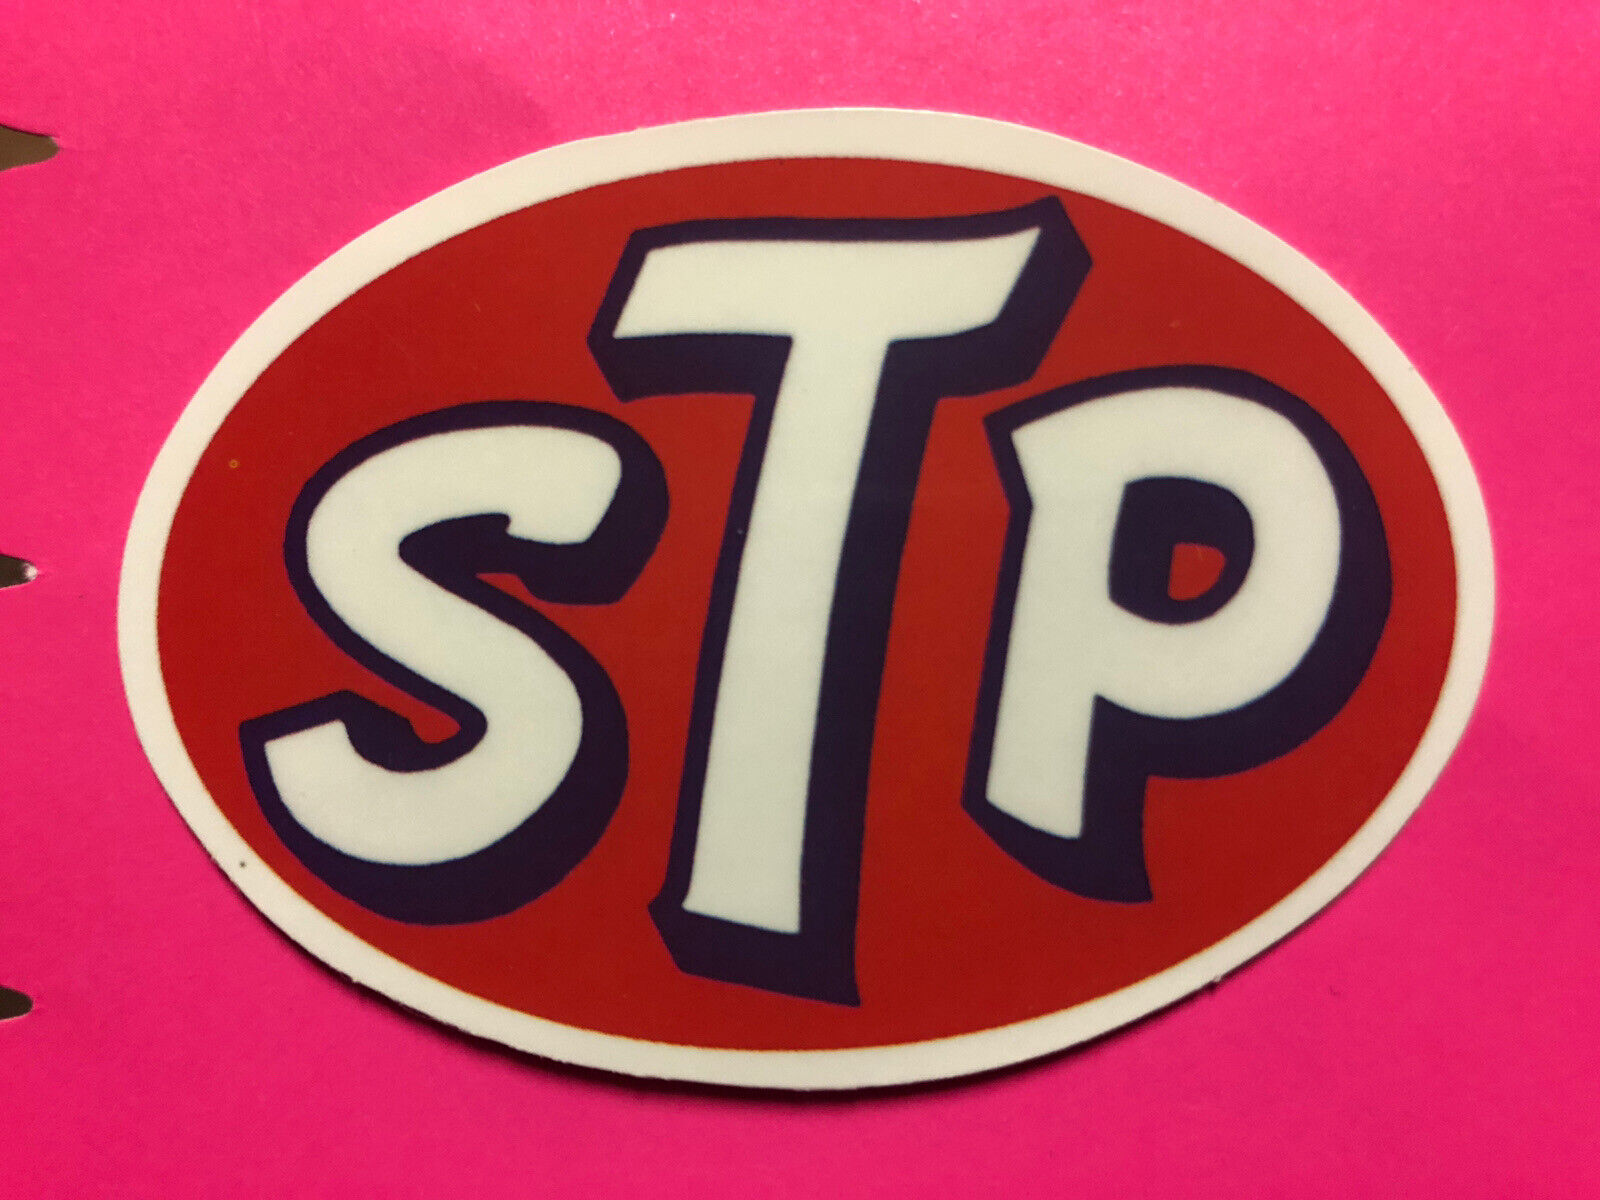 vtg STP 4”Oval 1970s to 1990s Auto Racing sticker.  Self Adhesive Glossy Finish